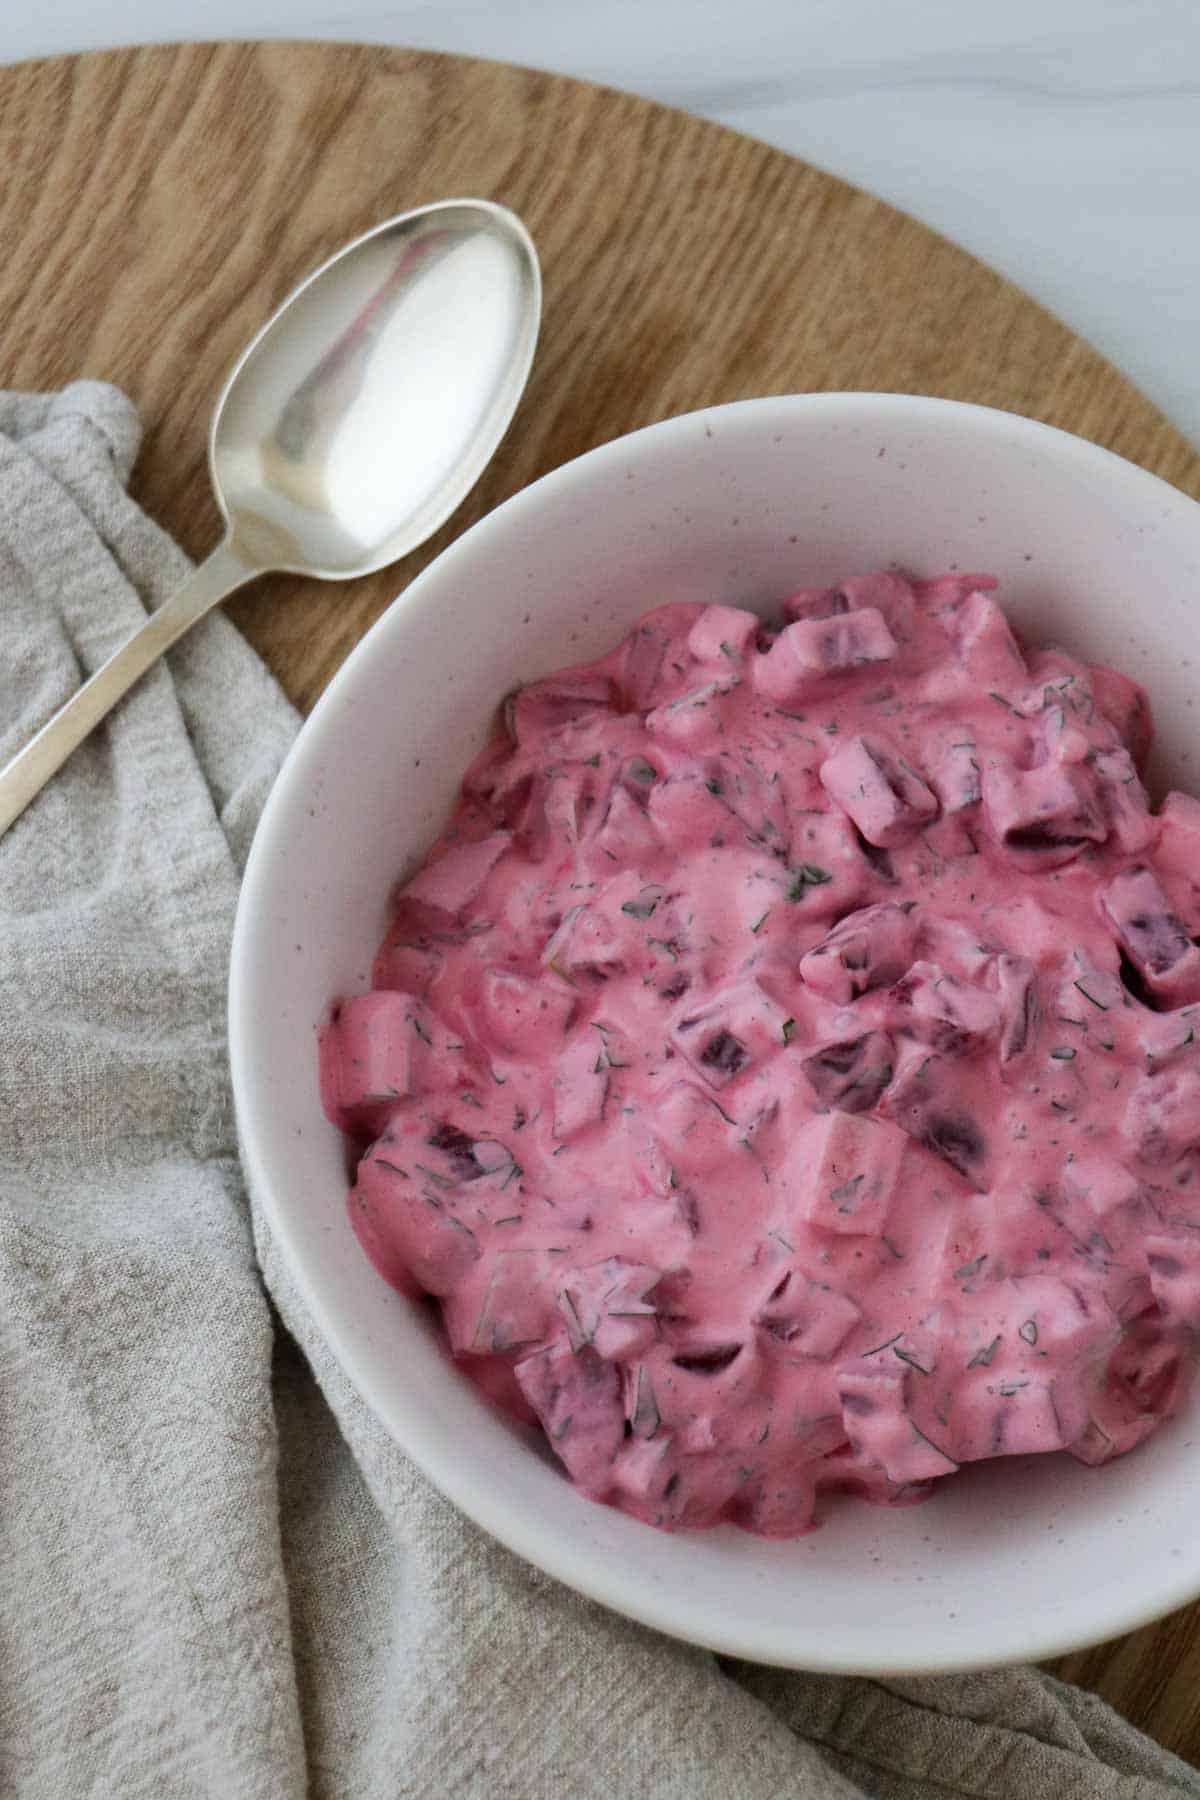 beetroot salad (rödbetssallad)in bowl with a spoon on the side. 